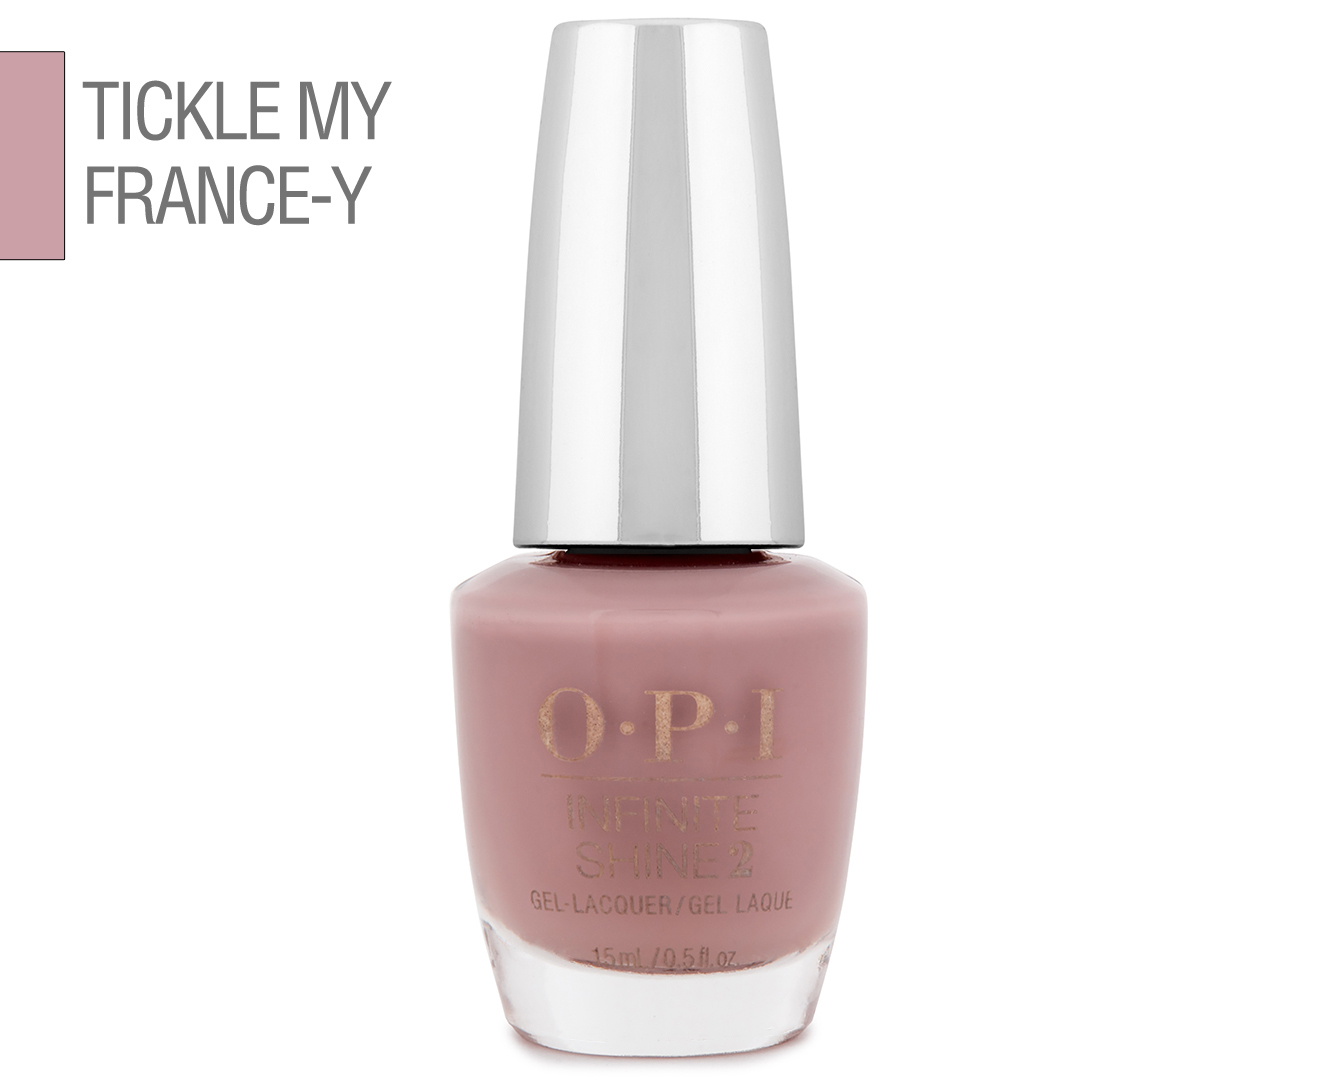 7. OPI Infinite Shine in "Tickle My France-y" - wide 2